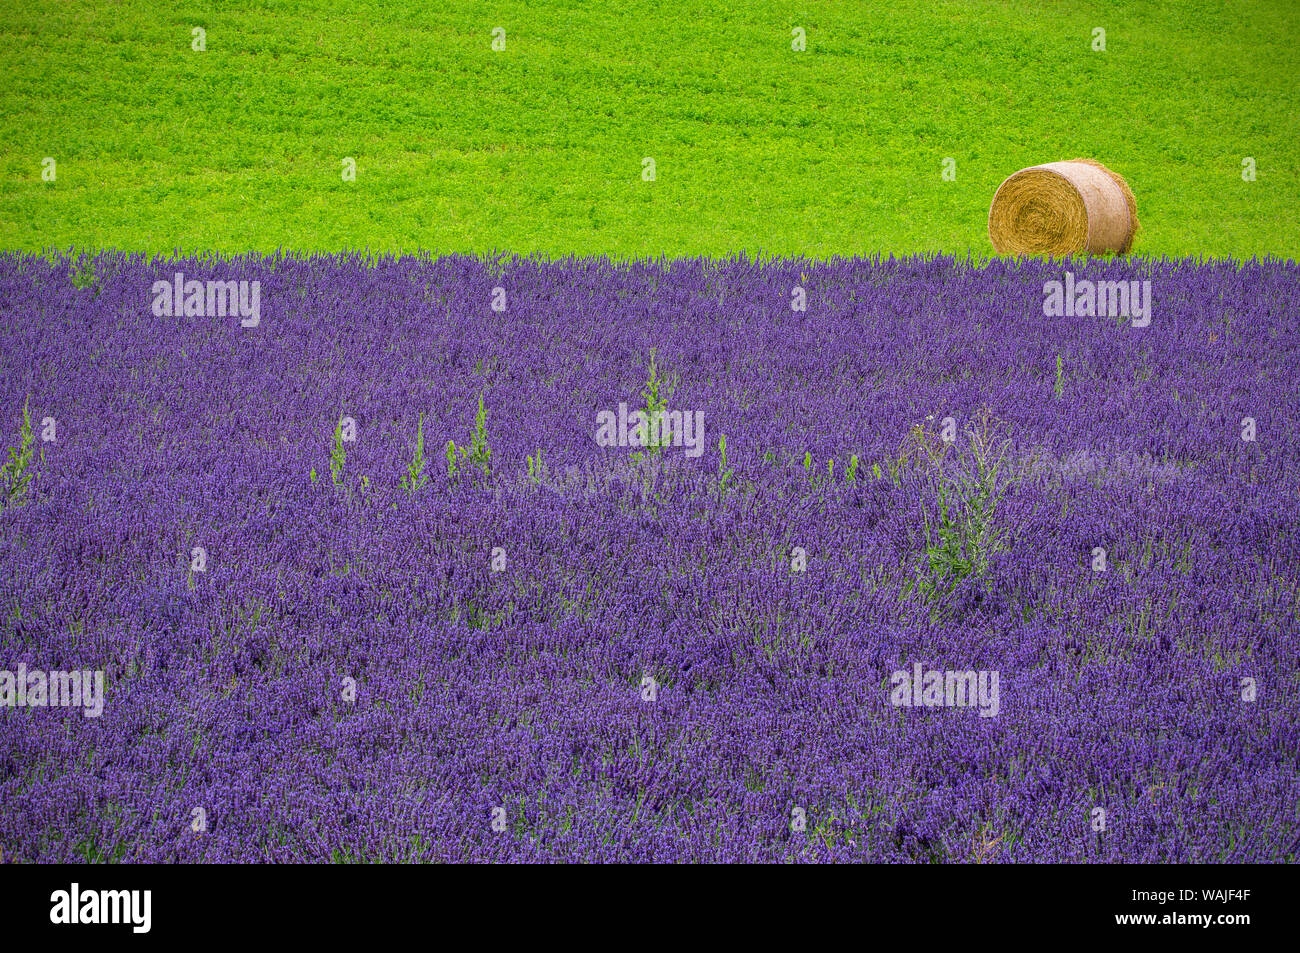 Europe, France, Provence. Farm field with lavender and hay bale. Credit as: Jim Nilsen / Jaynes Gallery / DanitaDelimont.com Stock Photo